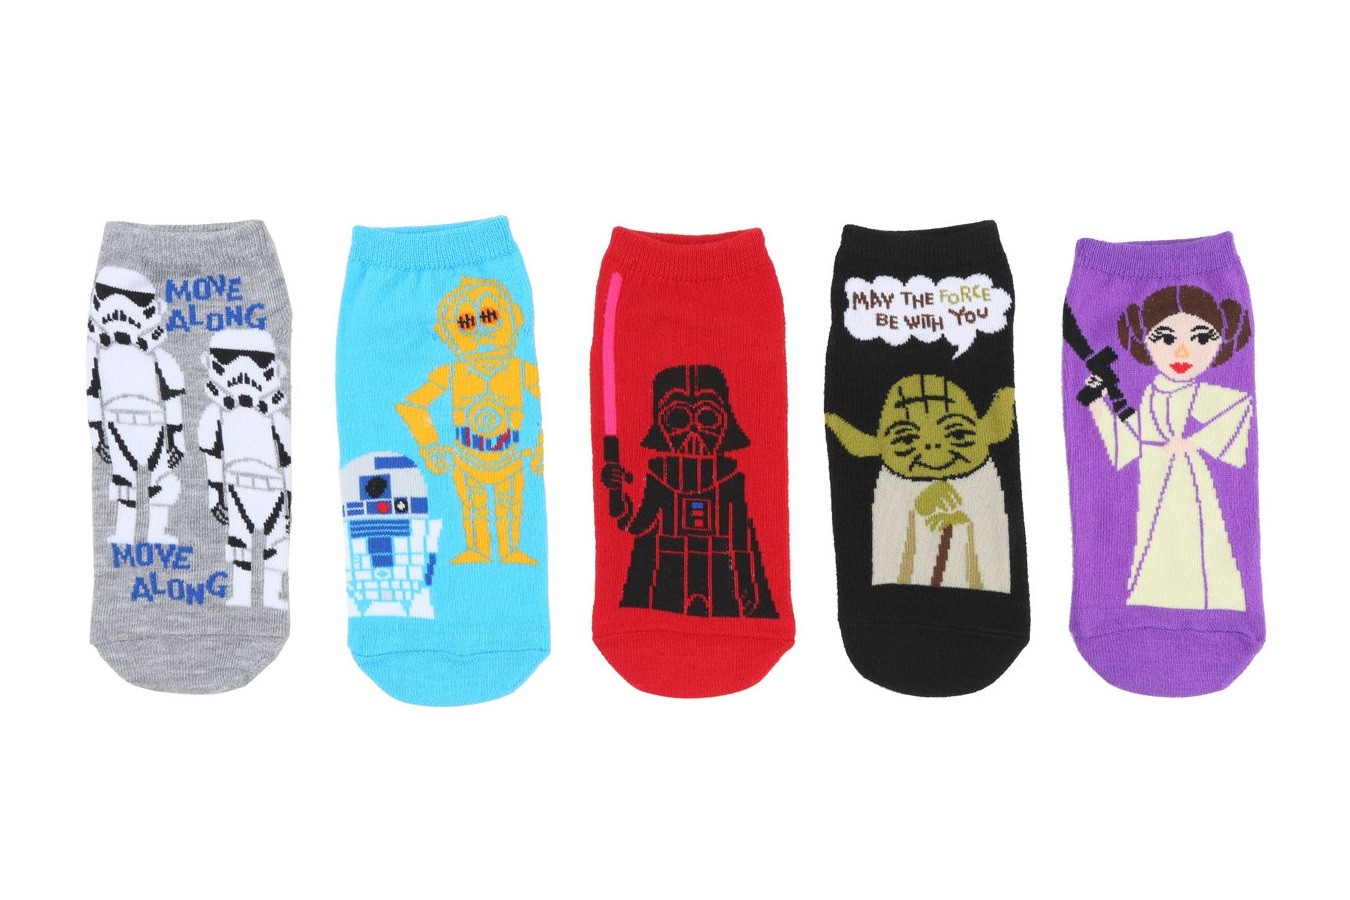 Star Wars ankle socks at Hot Topic